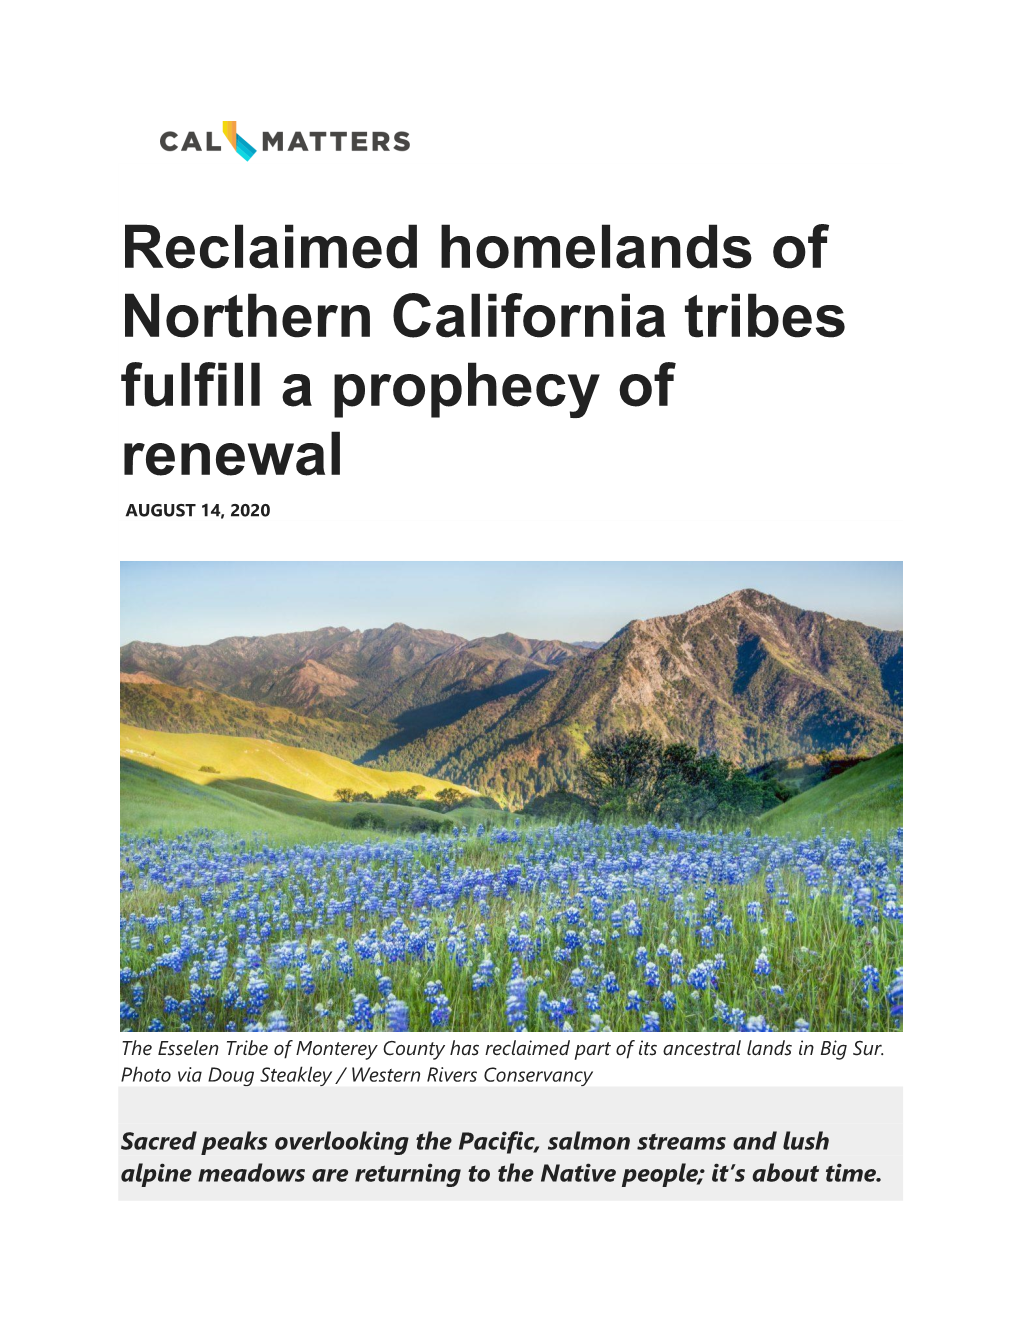 Reclaimed Homelands of Northern California Tribes Fulfill a Prophecy of Renewal AUGUST 14, 2020